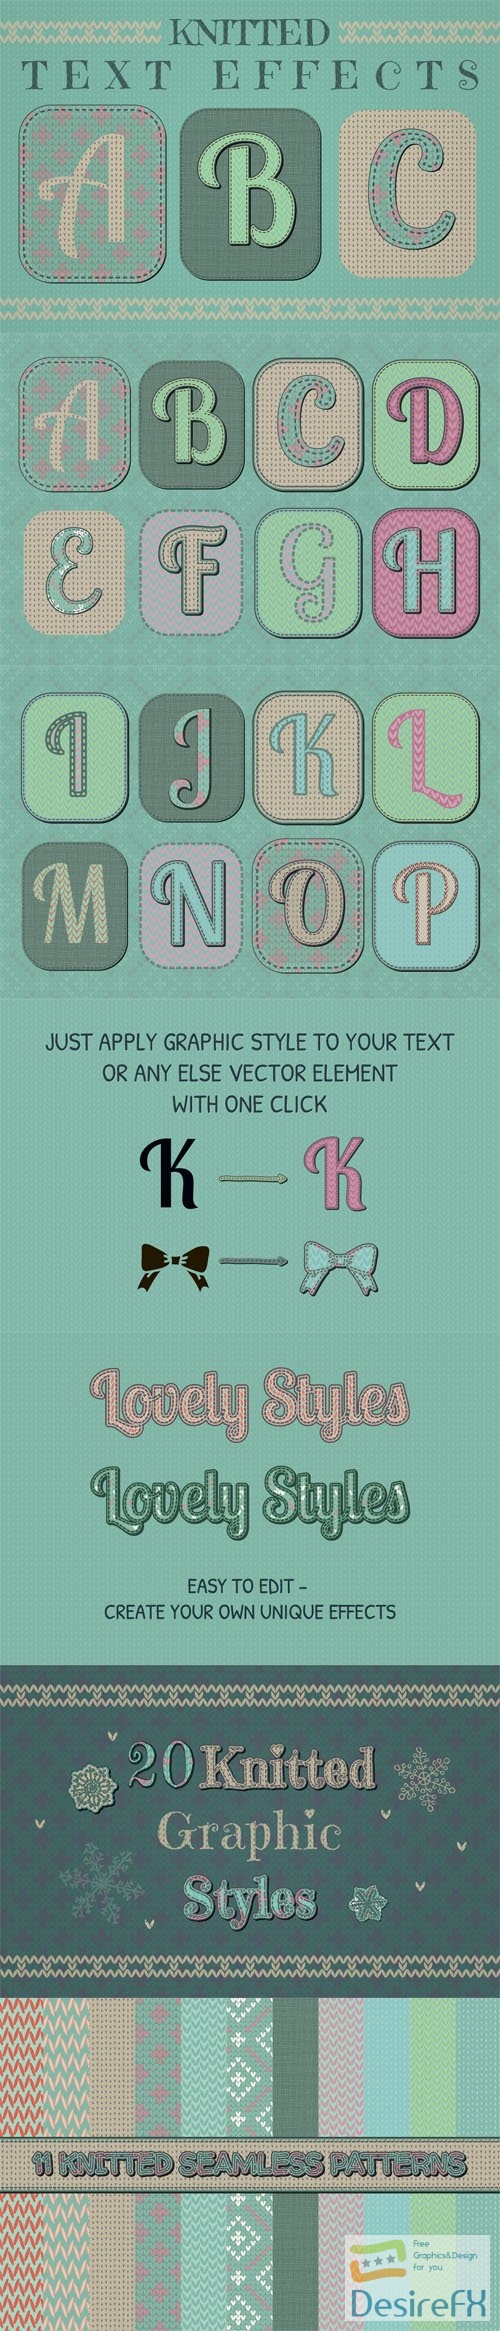 Knitted Text Effects - 20 Knitted Illustrator Graphic Styles